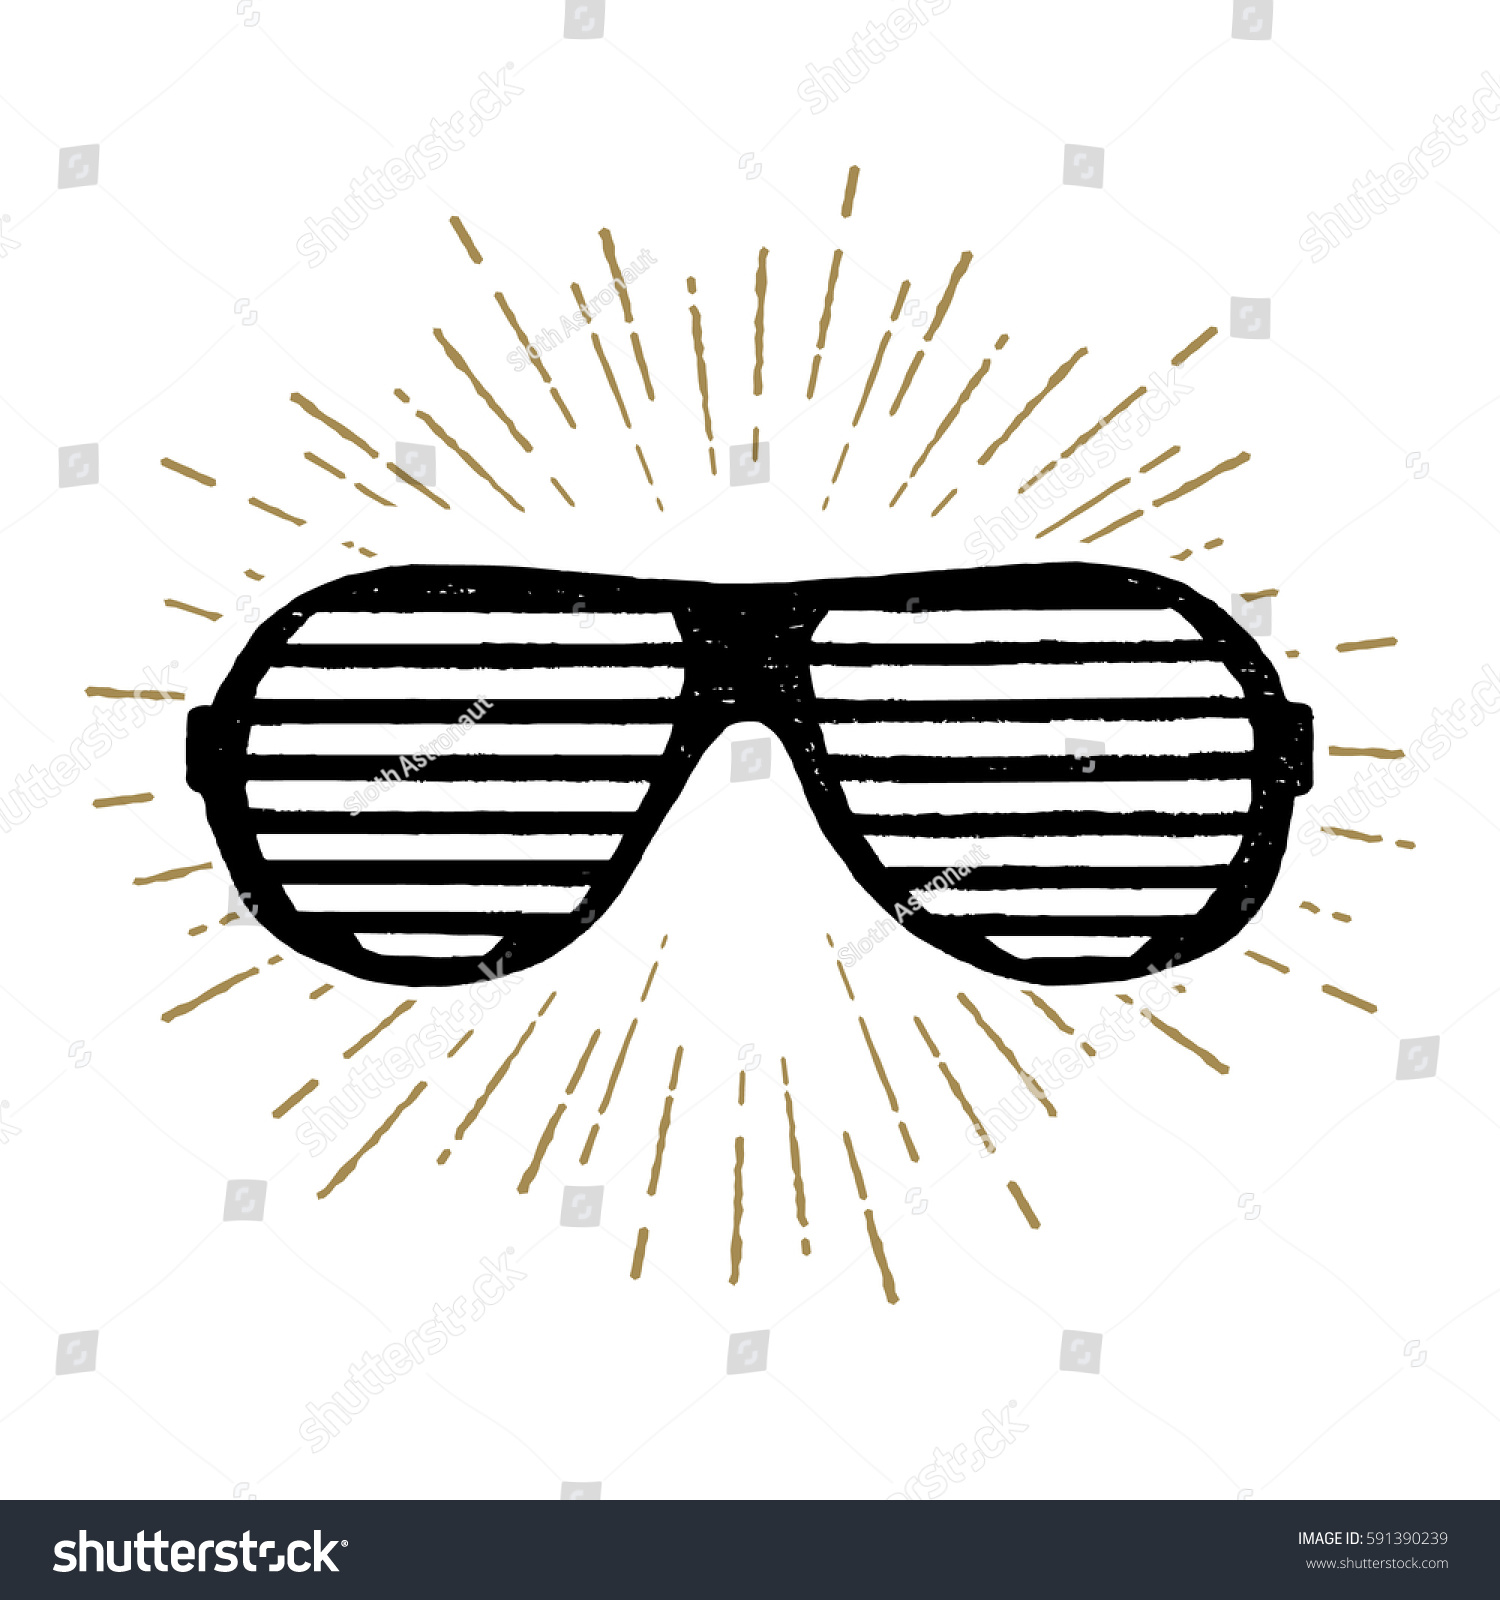 Hand Drawn 90s Themed Icon Striped Stock Vector 591390239 Shutterstock 